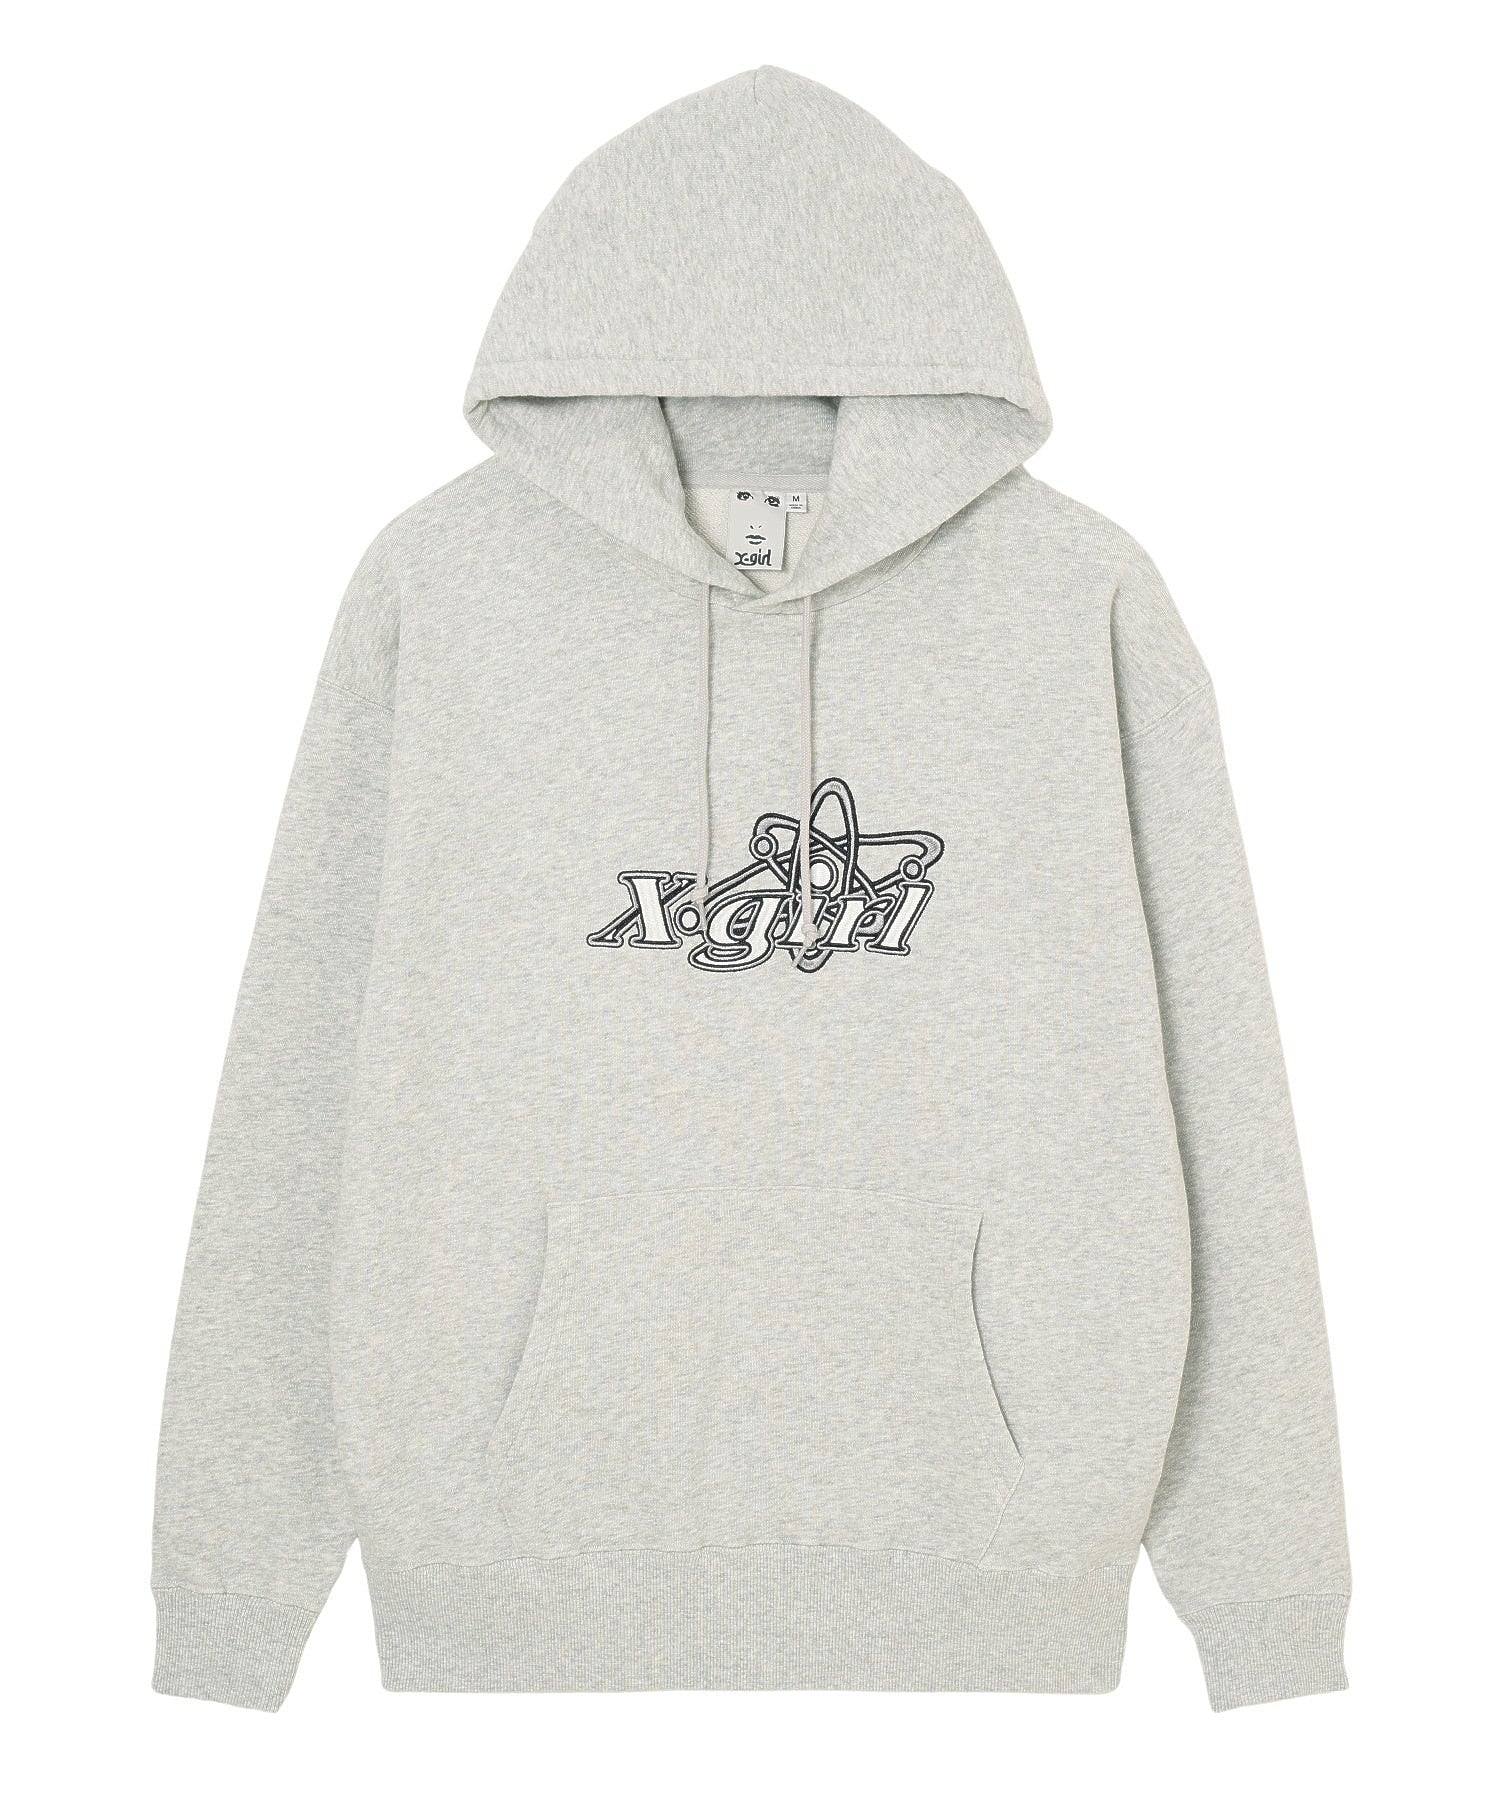 CHEMICAL SYMBOL LOGO EMBROIDERY SWEAT HOODIE X-girl